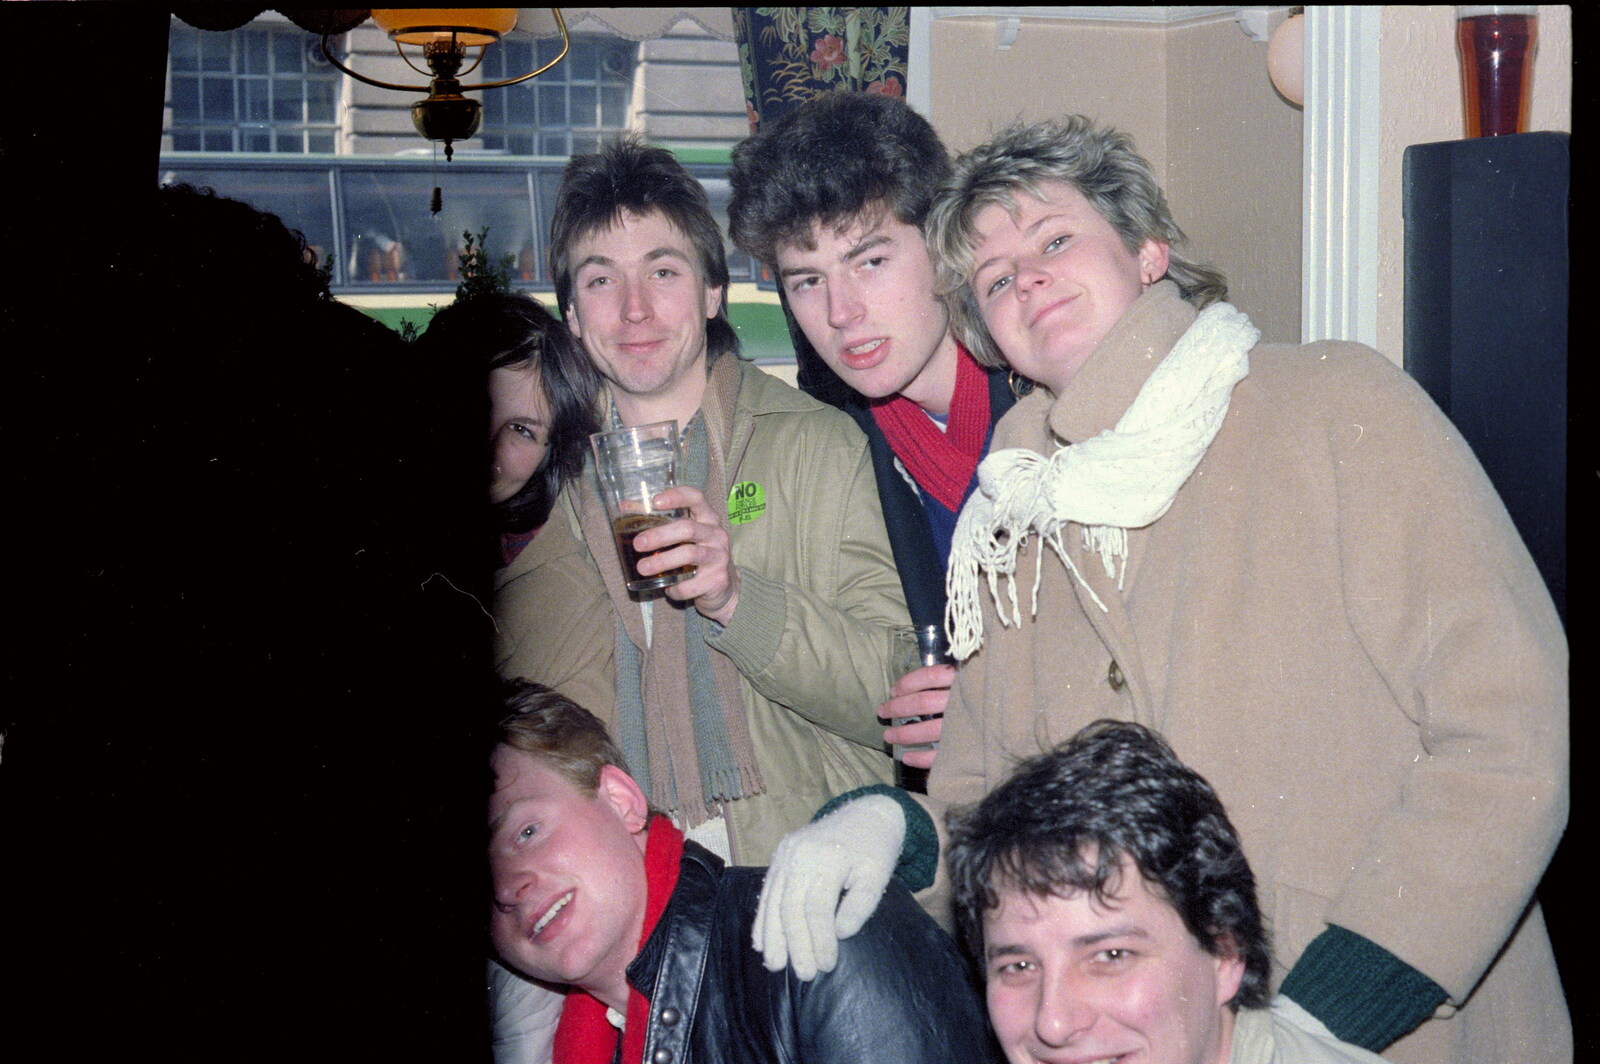 Some random beer drinking somewhere from Uni: No Chance Fowler! A student Demonstration, London - 26th February 1986